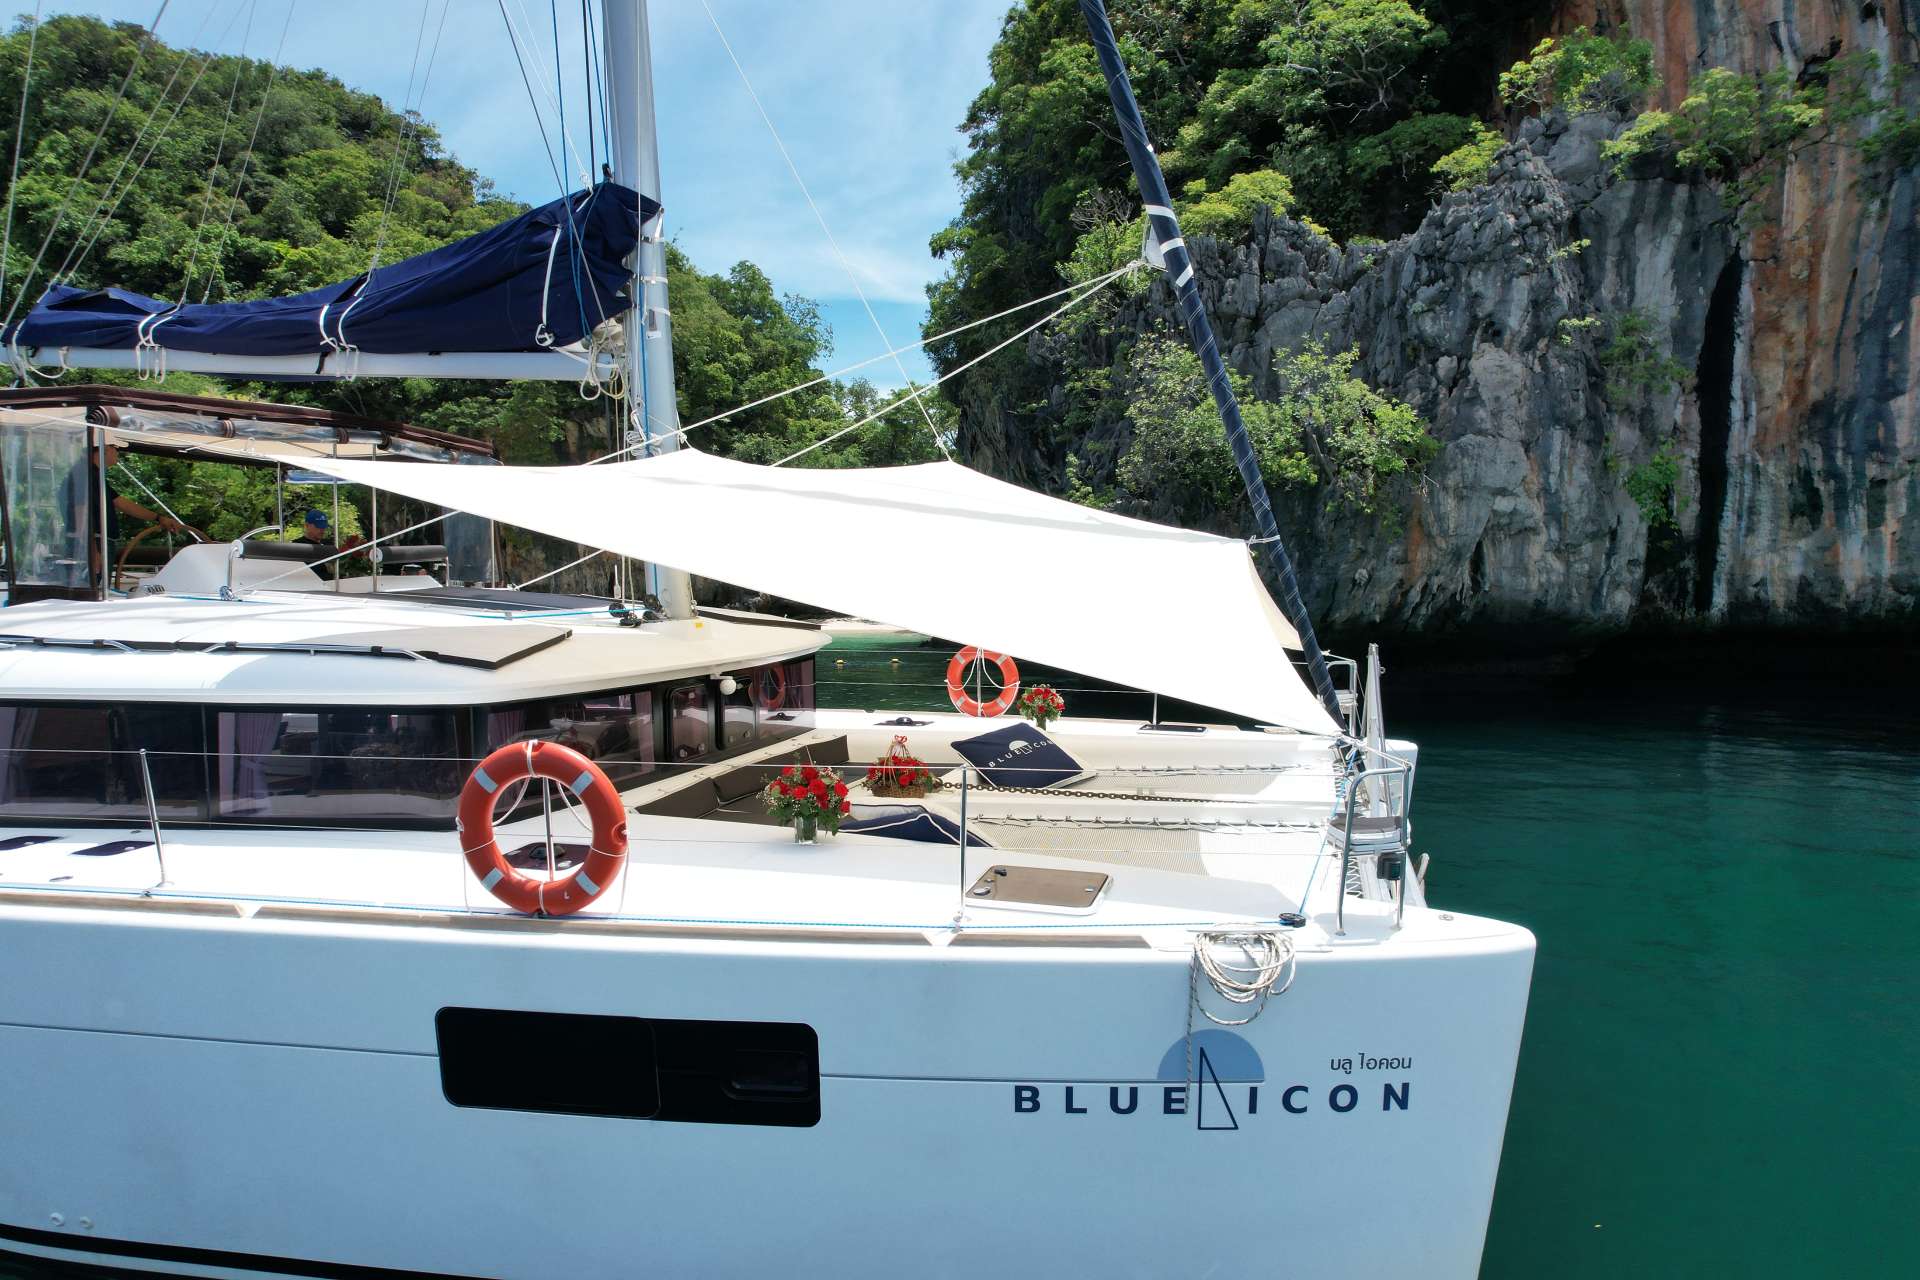 Lagoon 450 F (4 cab) - Luxury yacht charter Thailand & Boat hire in Thailand Tambon Nong Chaeng 1